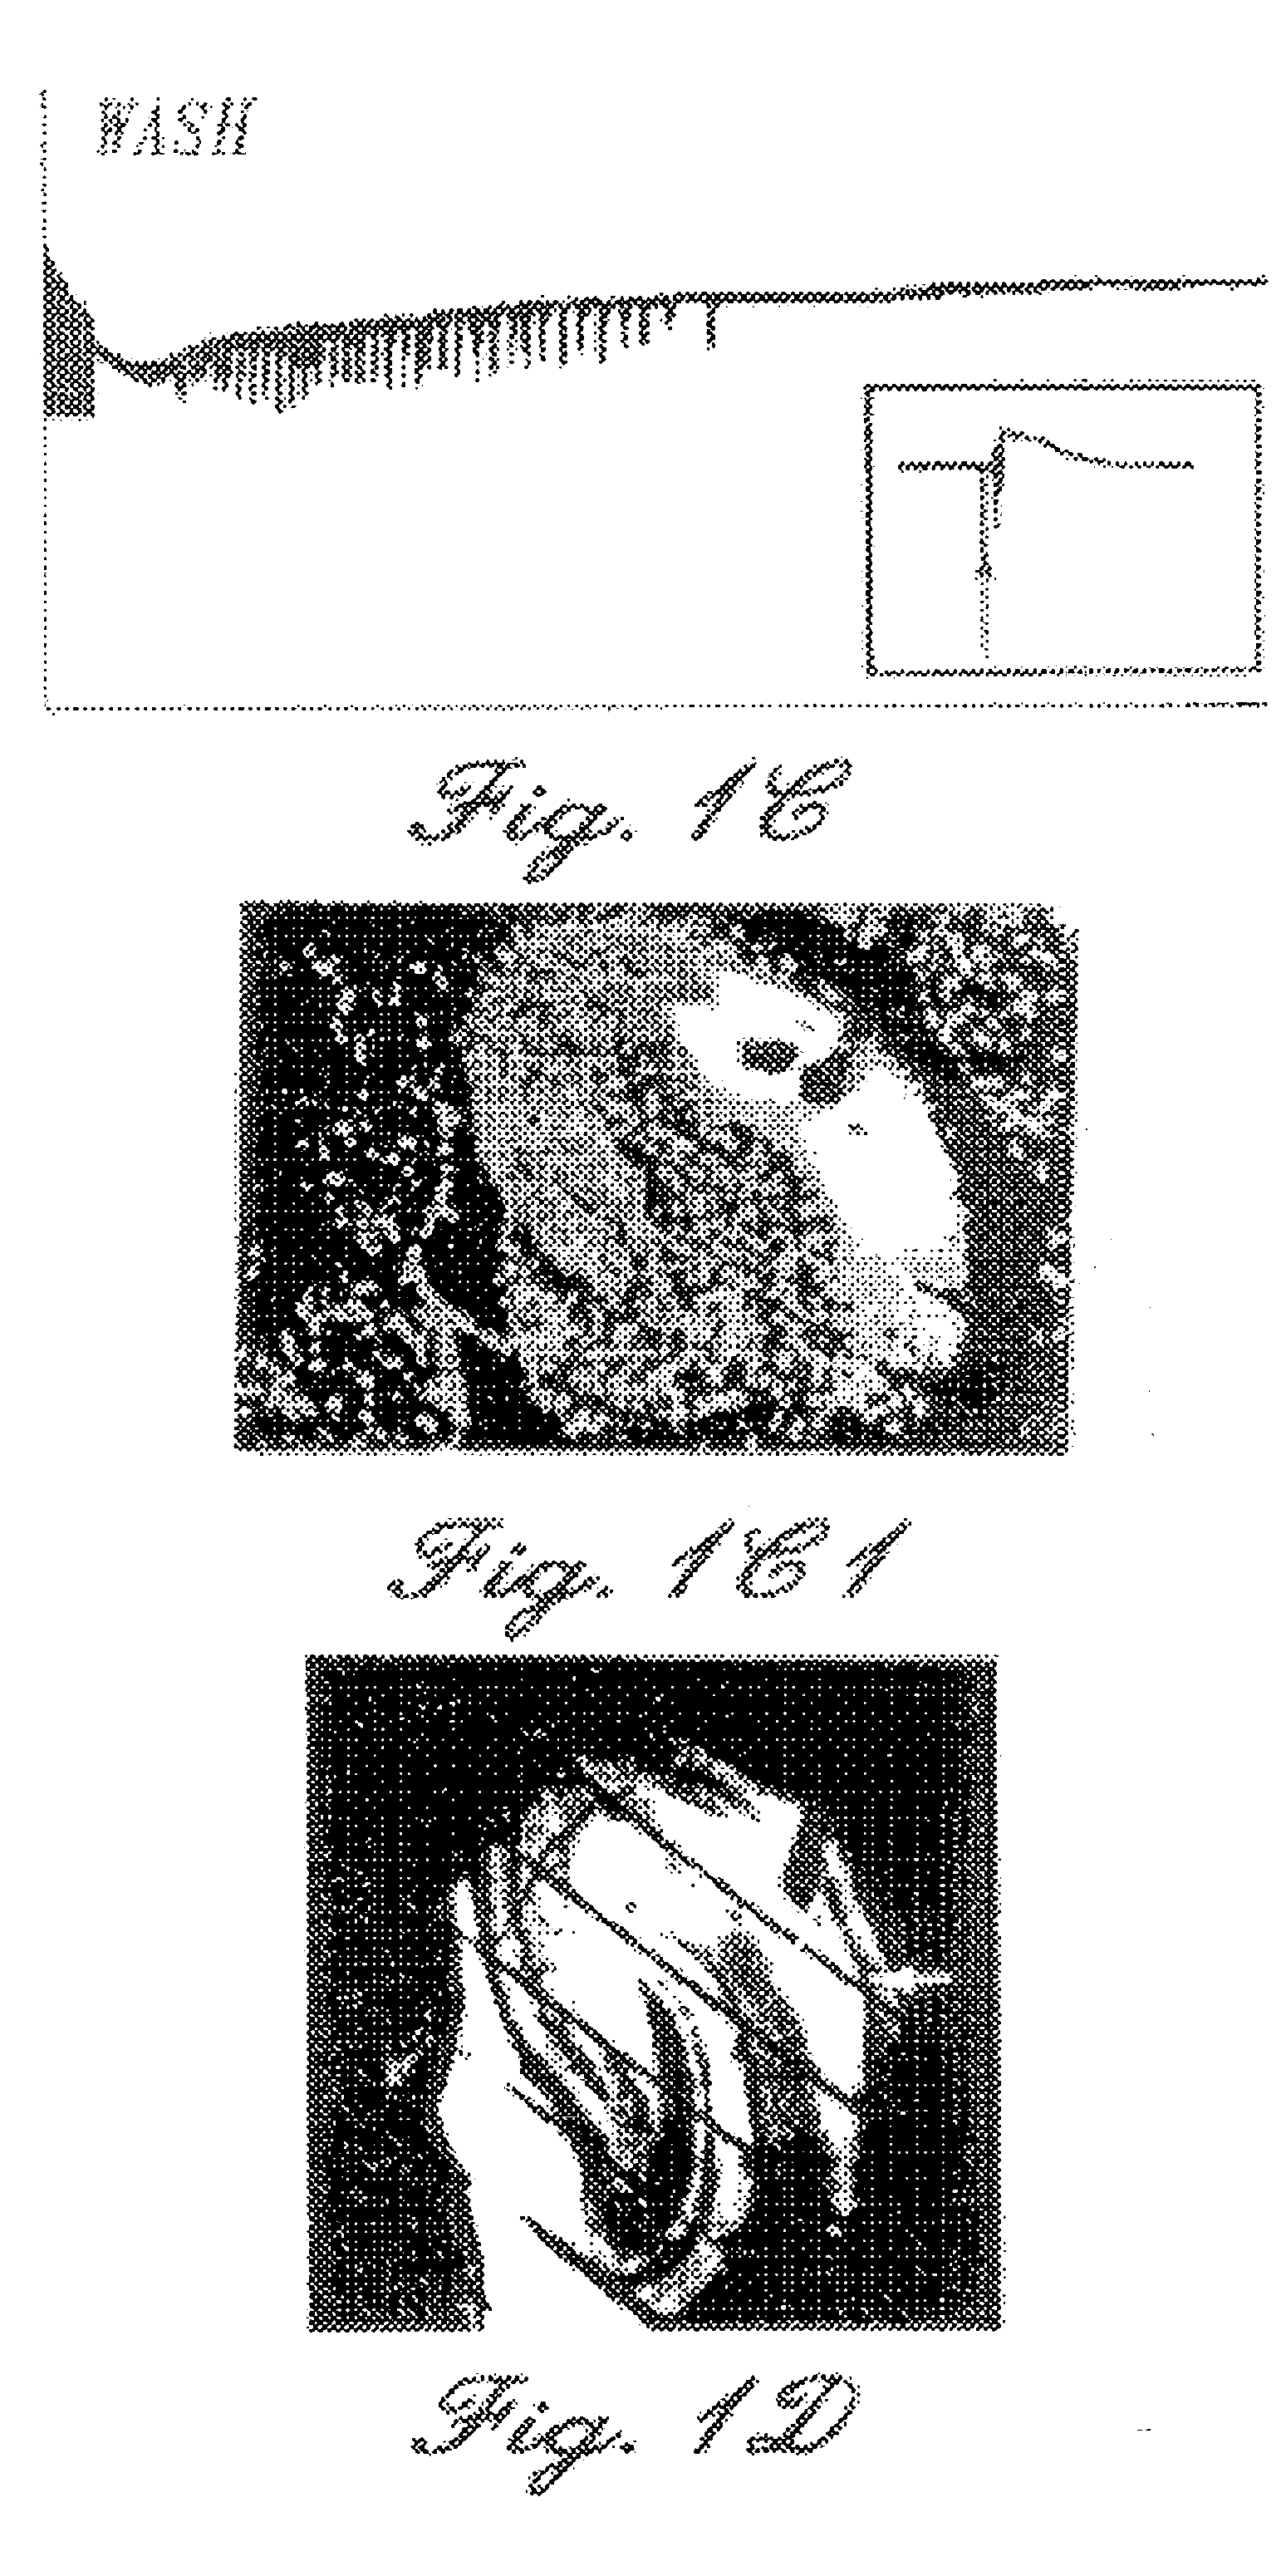 Compositions and methods for the treatment of disorders of the central and peripheral nervous systems